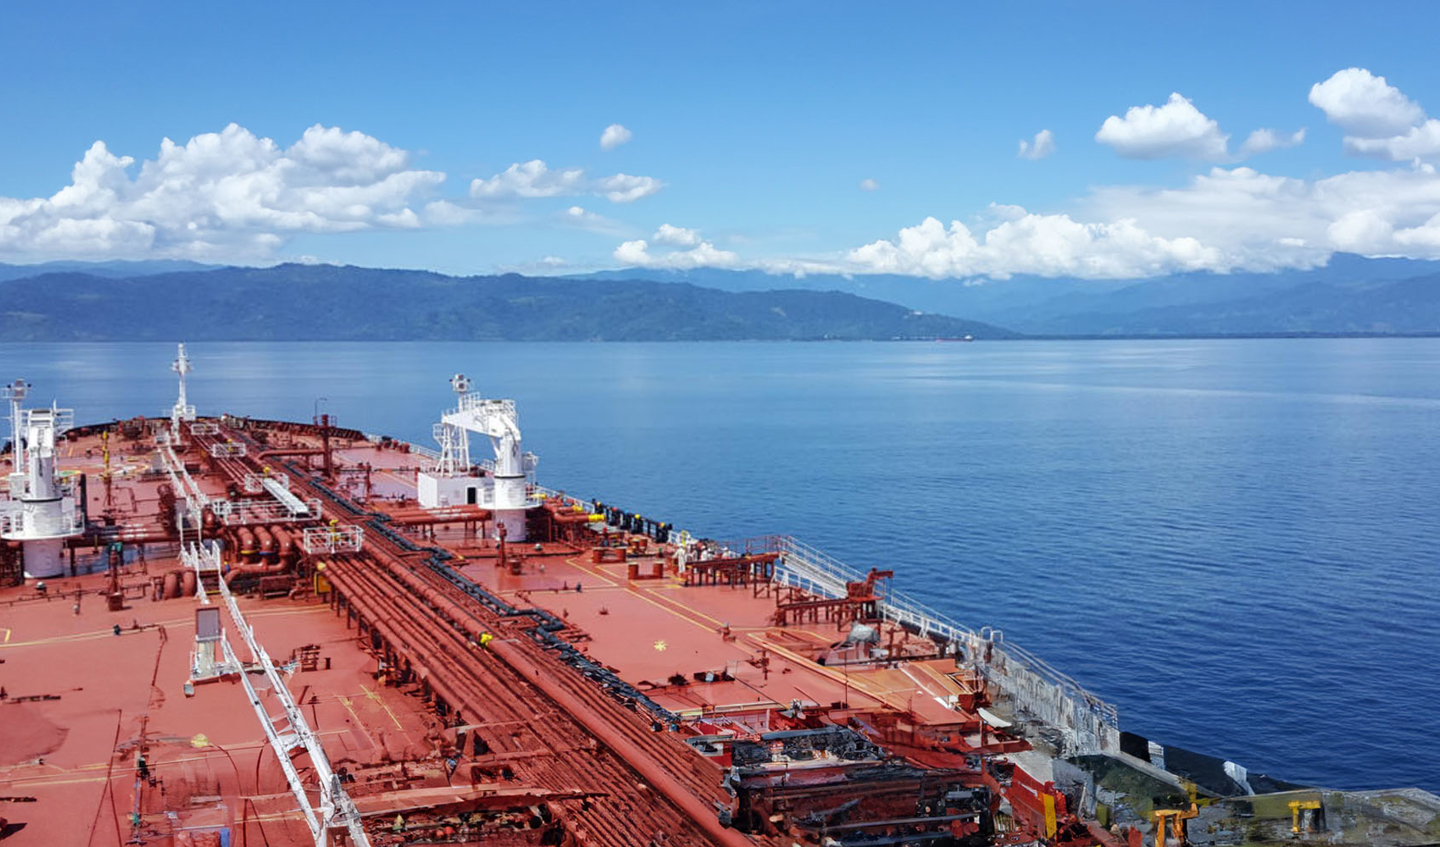 A tanker floats on the water with mountains in the background.